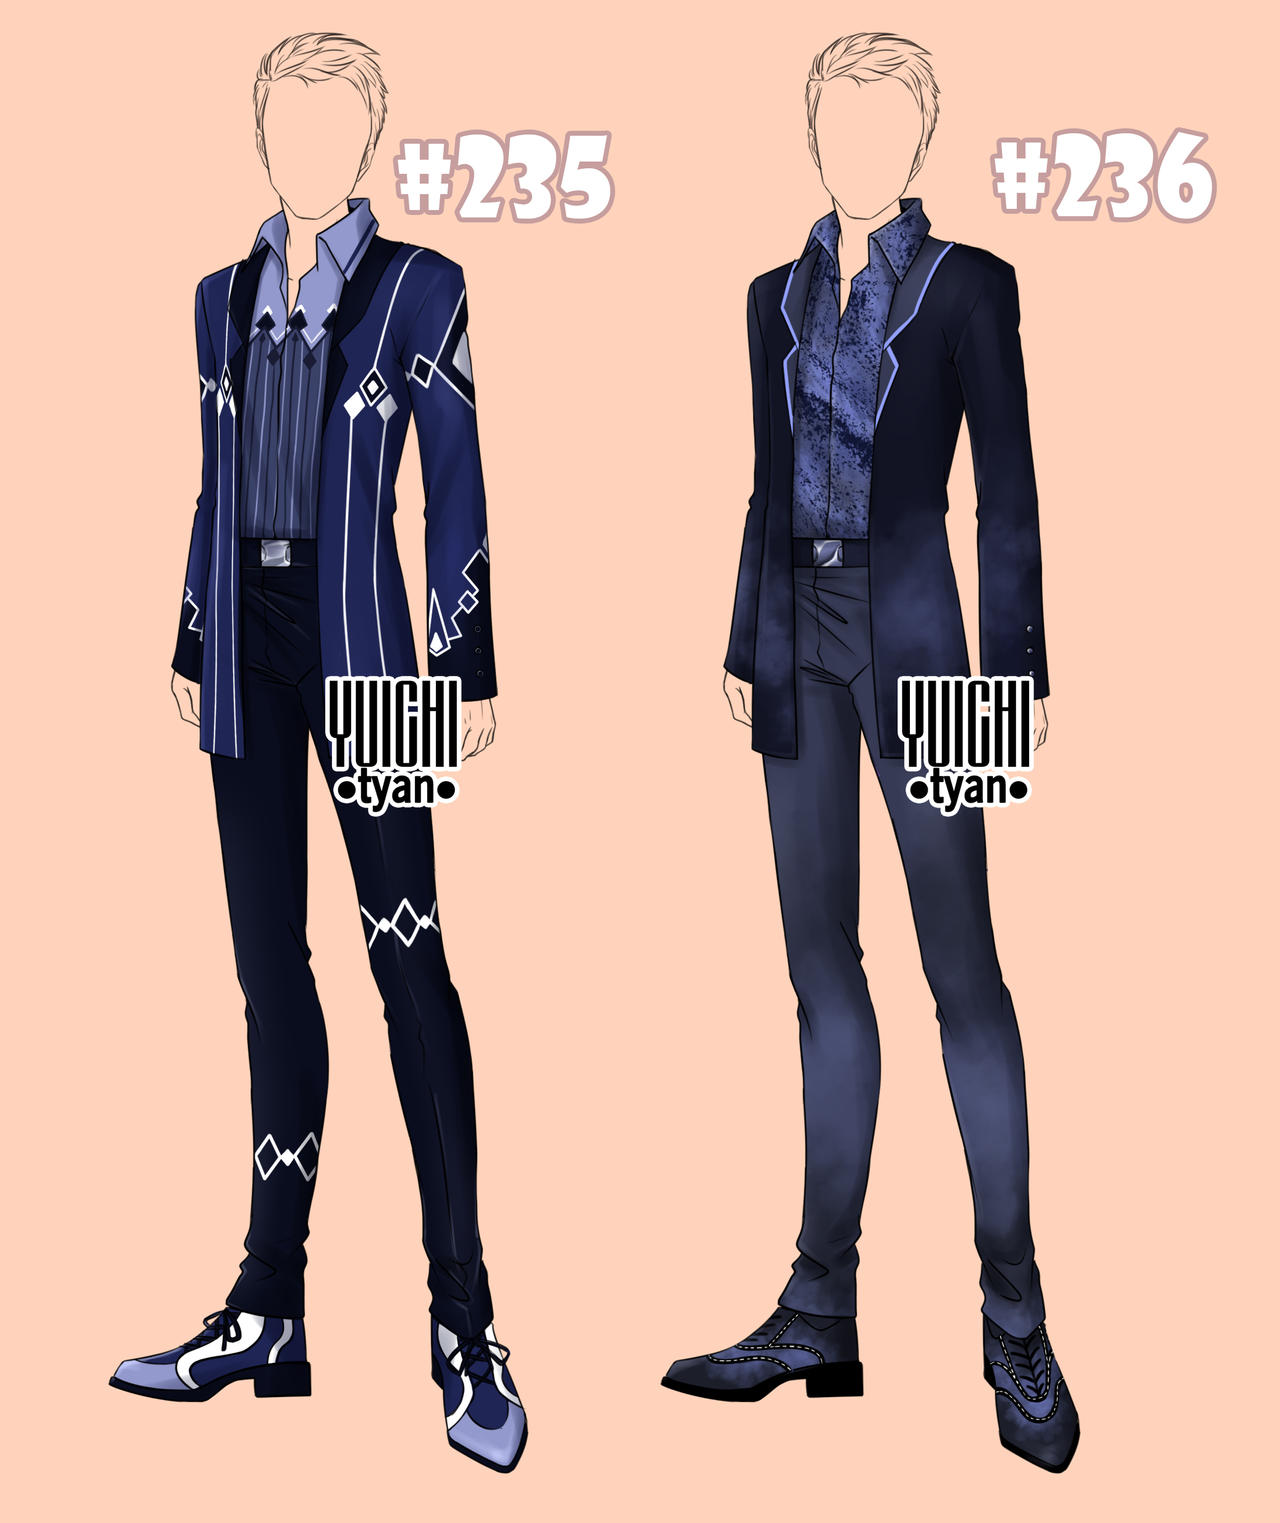 [1/2 open] male adopt Outfits 235-236 by YuiChi-tyan on DeviantArt